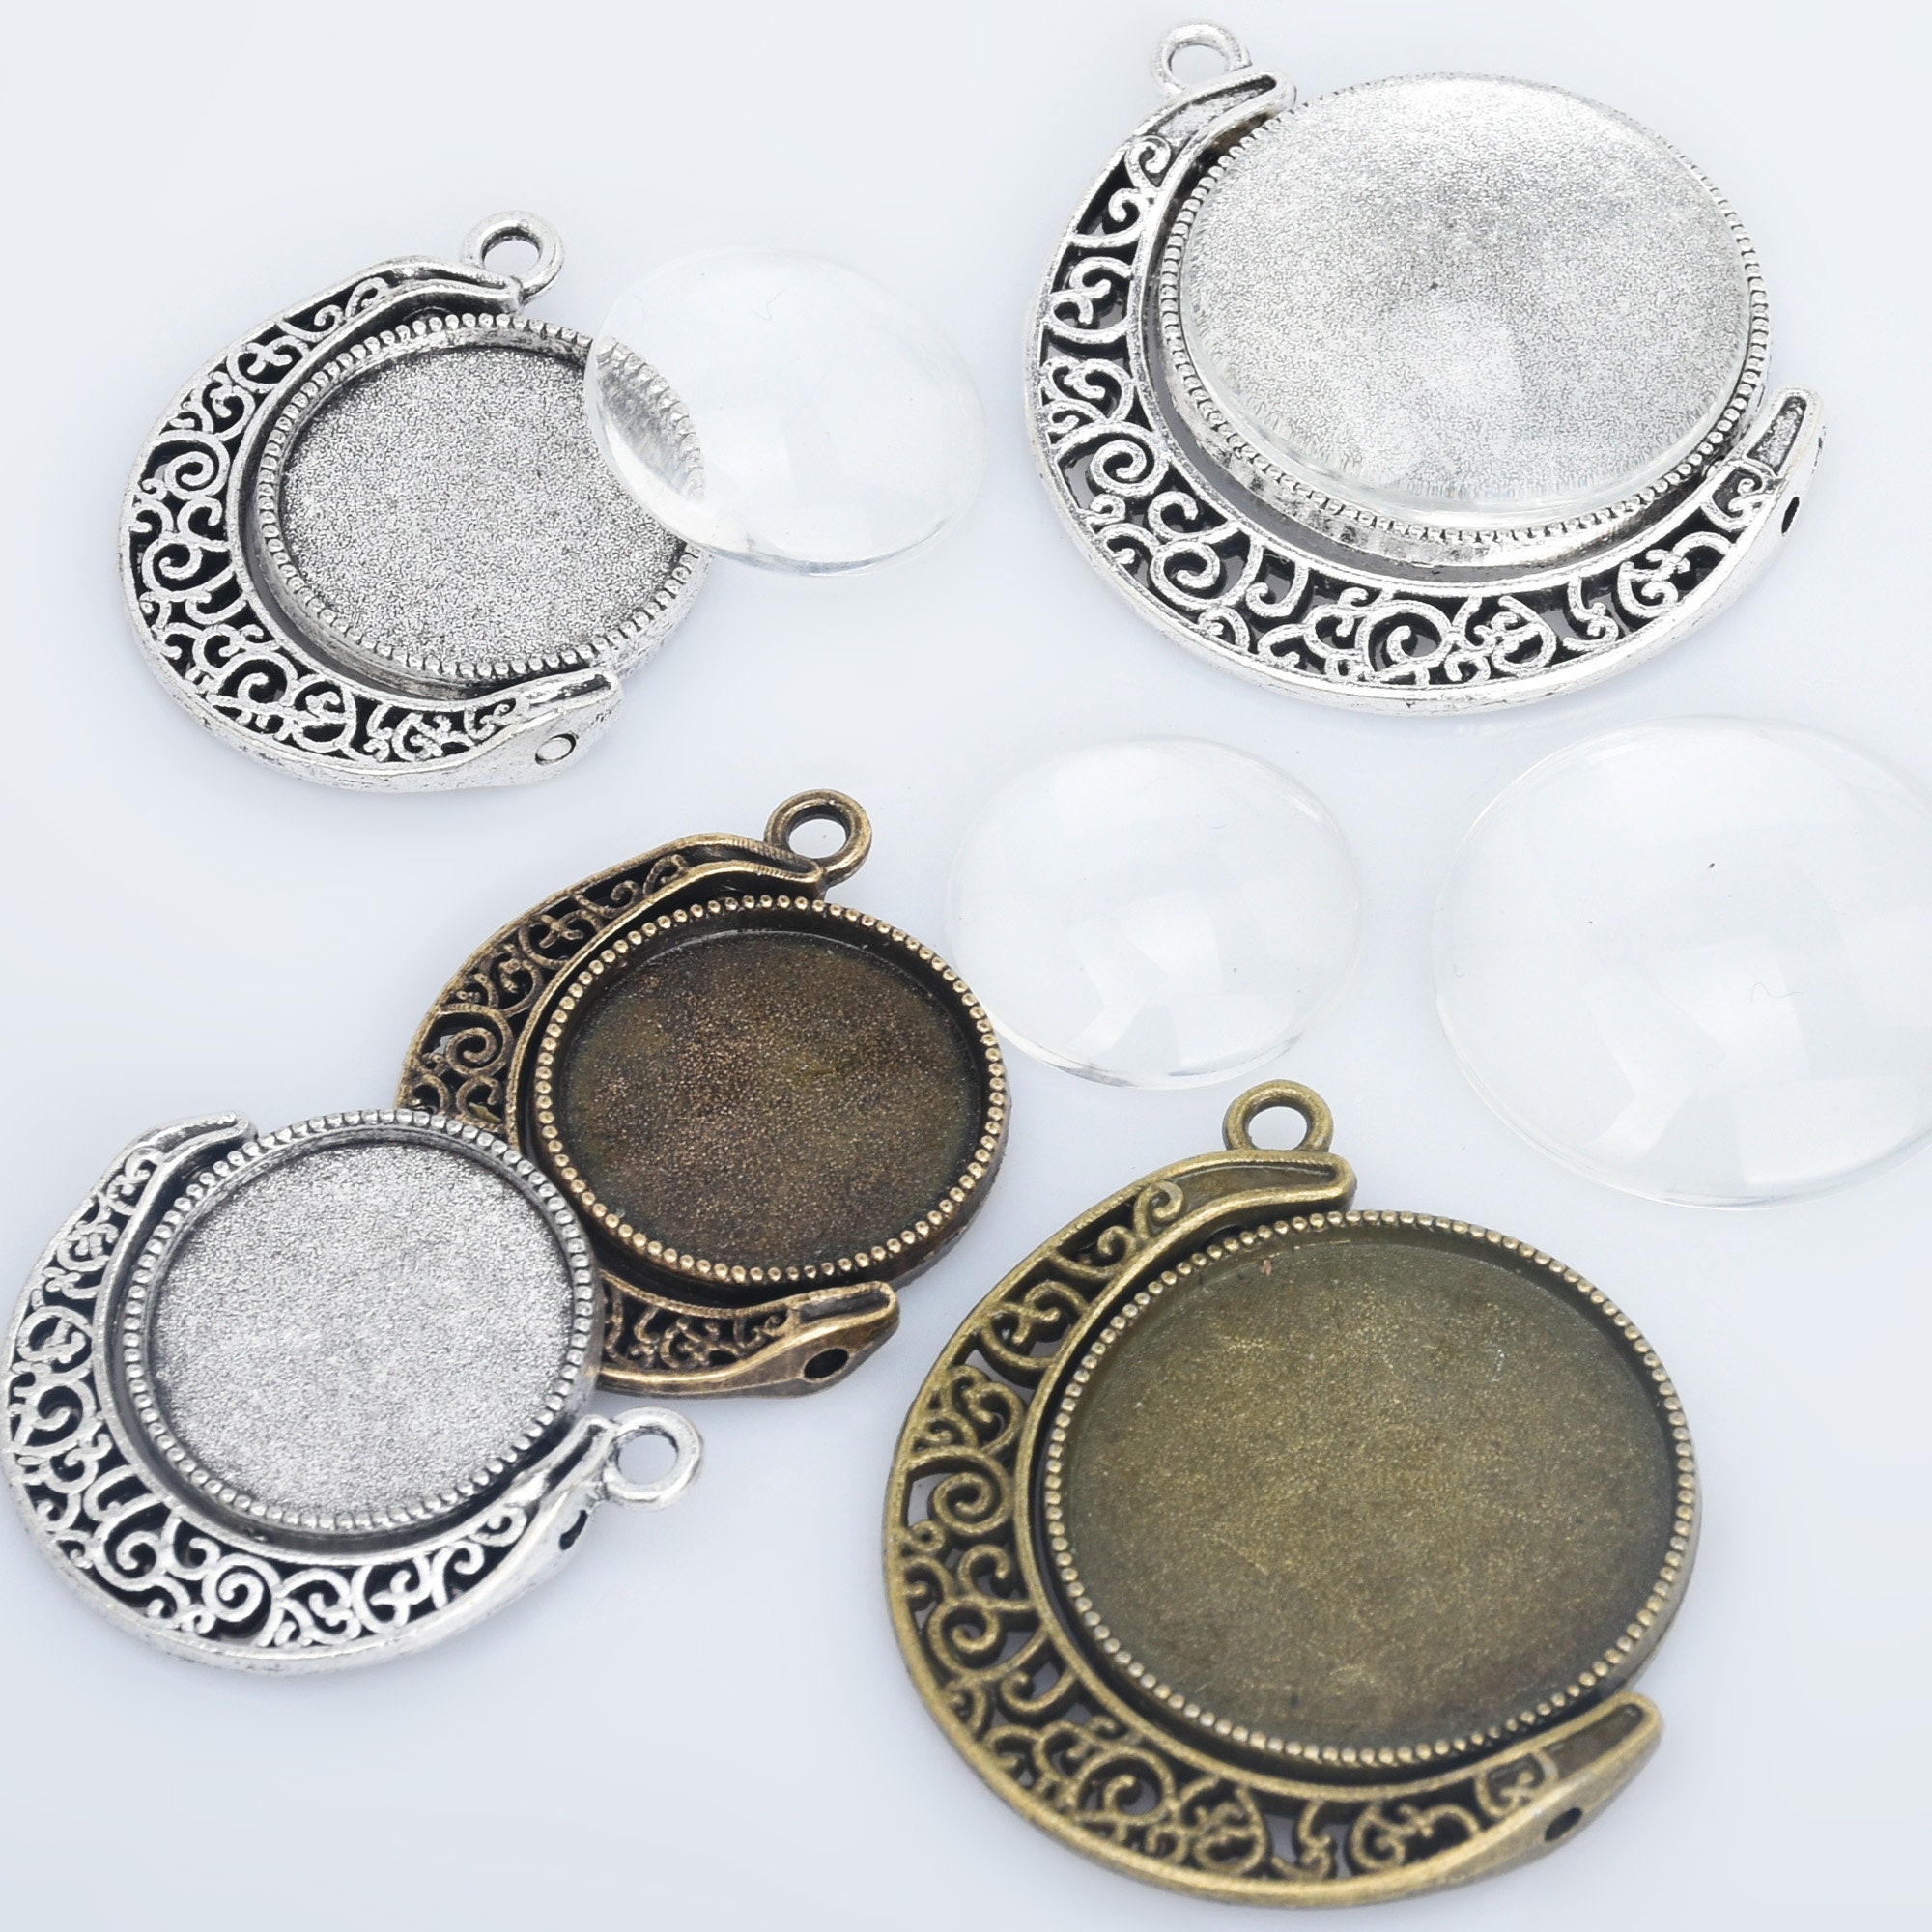 Sublimation Rotation Double Sided Necklace/pendant/gold